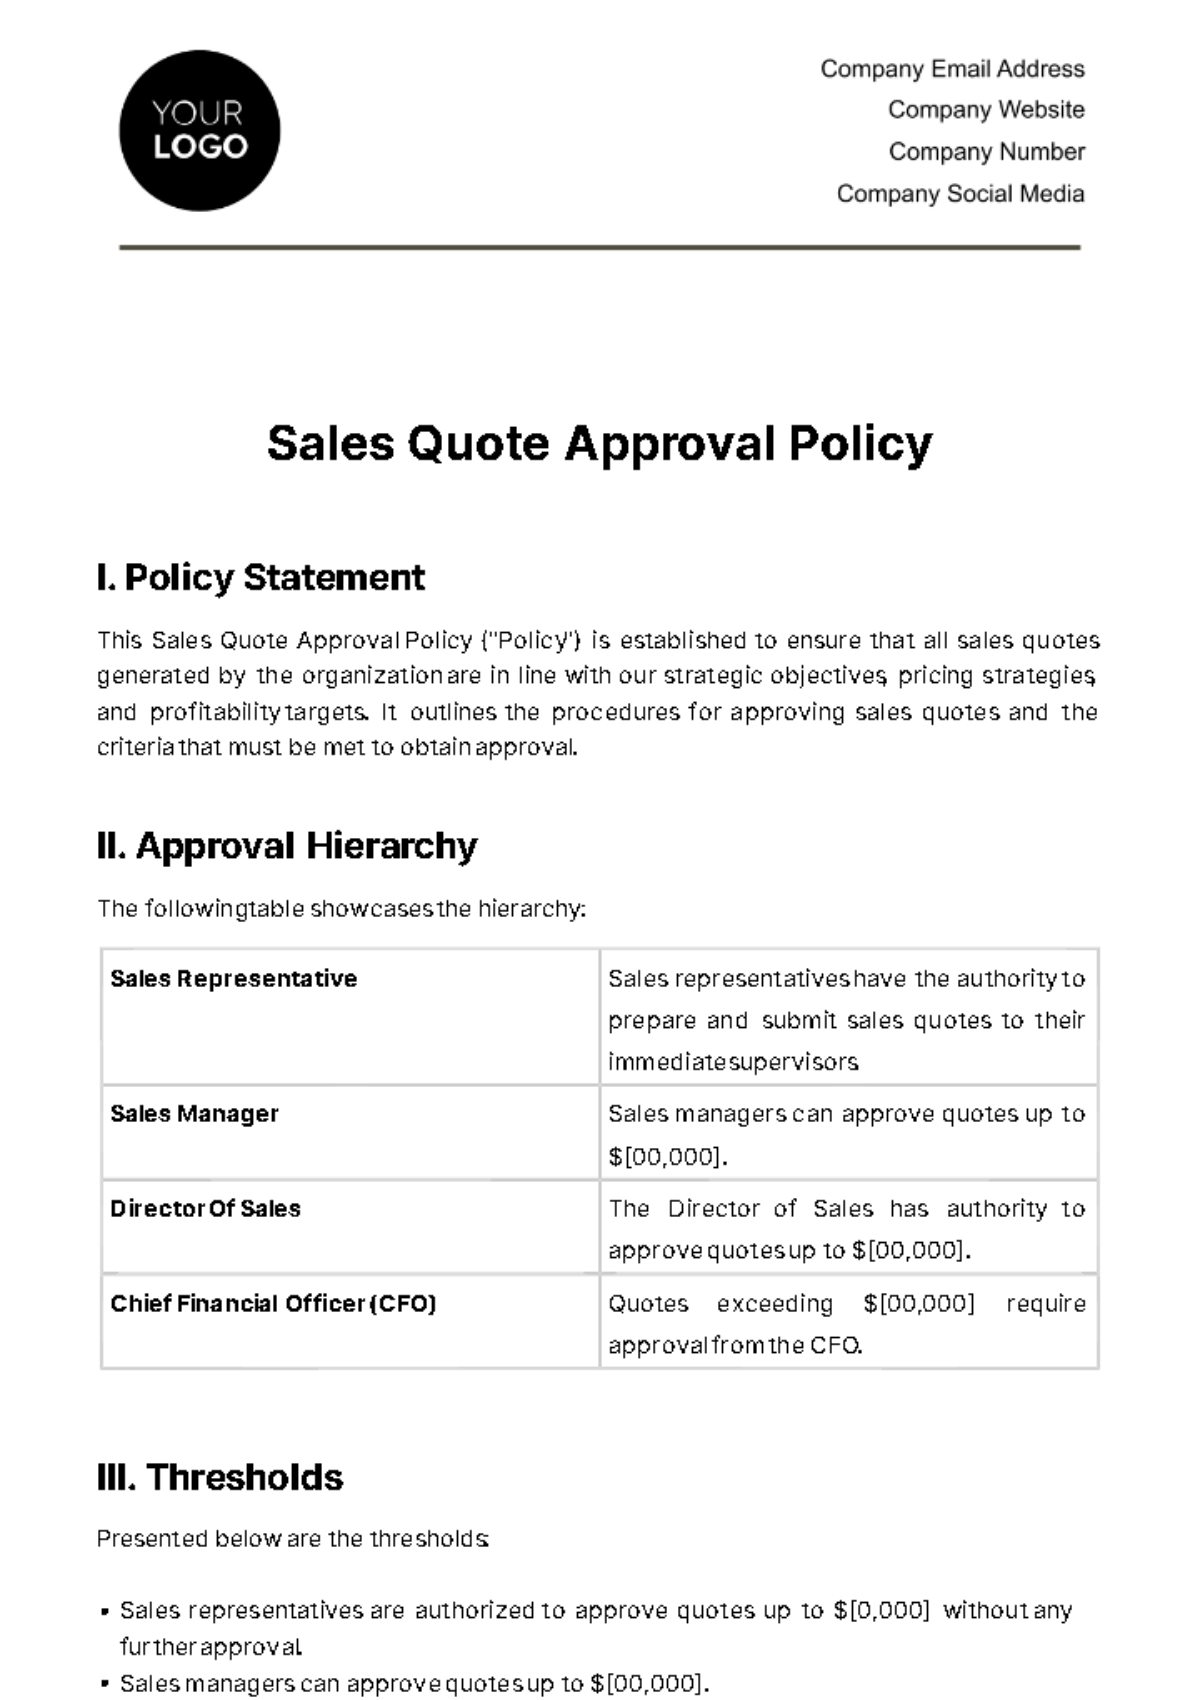 Sales Quote Approval Policy Template